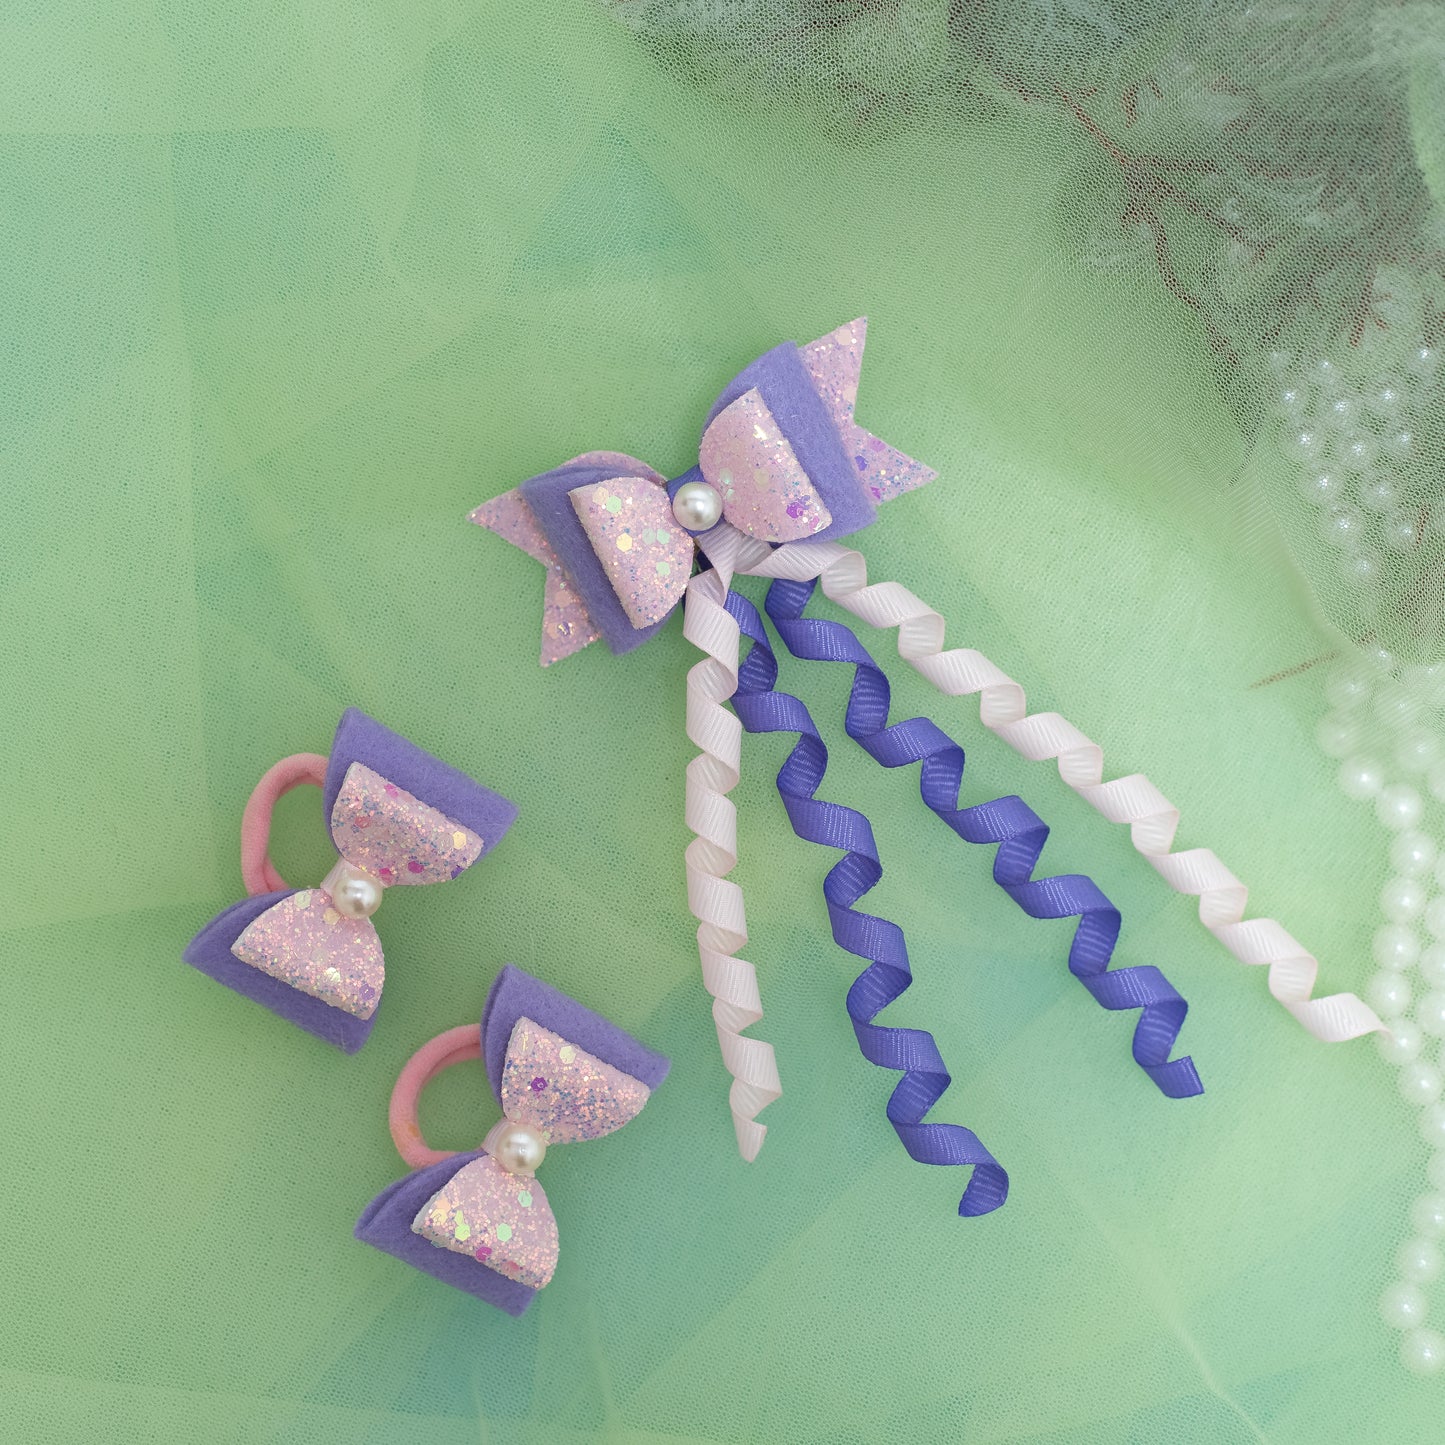 Combo: 1 Dangler Hair-pin and 2 Rubberbands with Fancy Shimmer Bow for Party -  Light Pink, Purple (Set of 1 pair Rubberbands , 1 Dangler on Alligator clip = 3